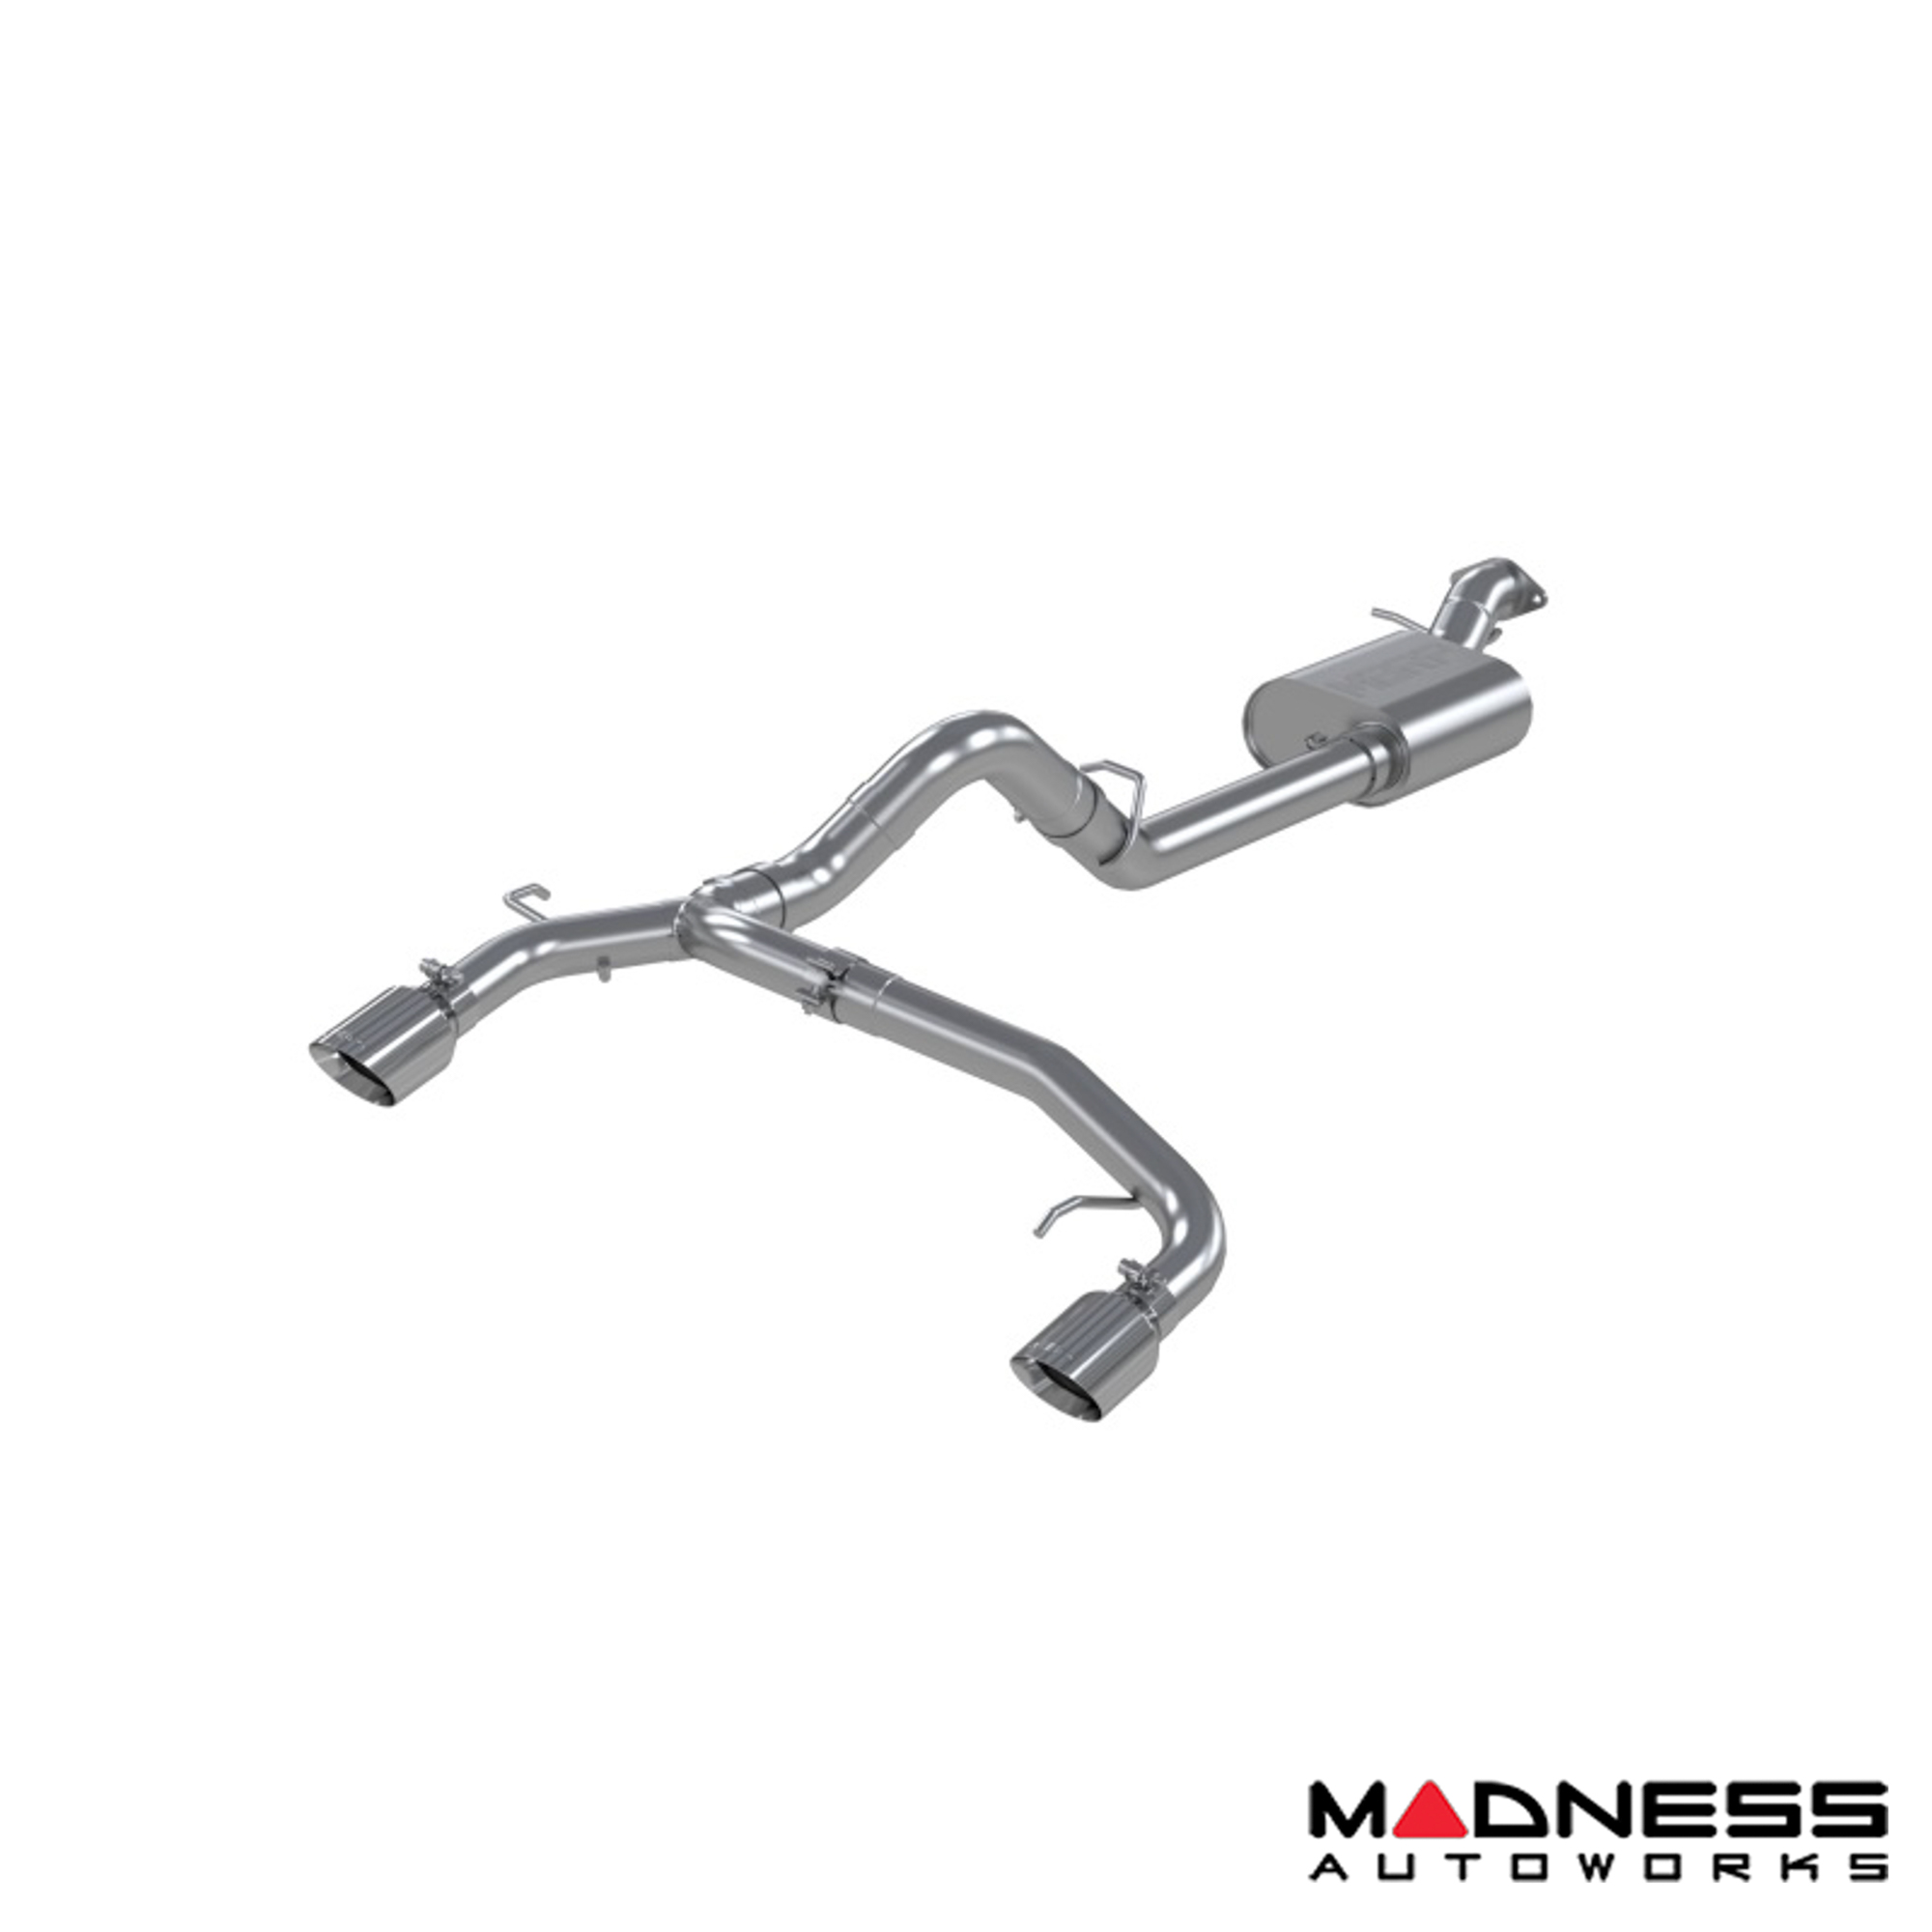 Ford Bronco Performance Exhaust System - Cat Back - Dual Exit - MBRP - Aluminized - 3" 